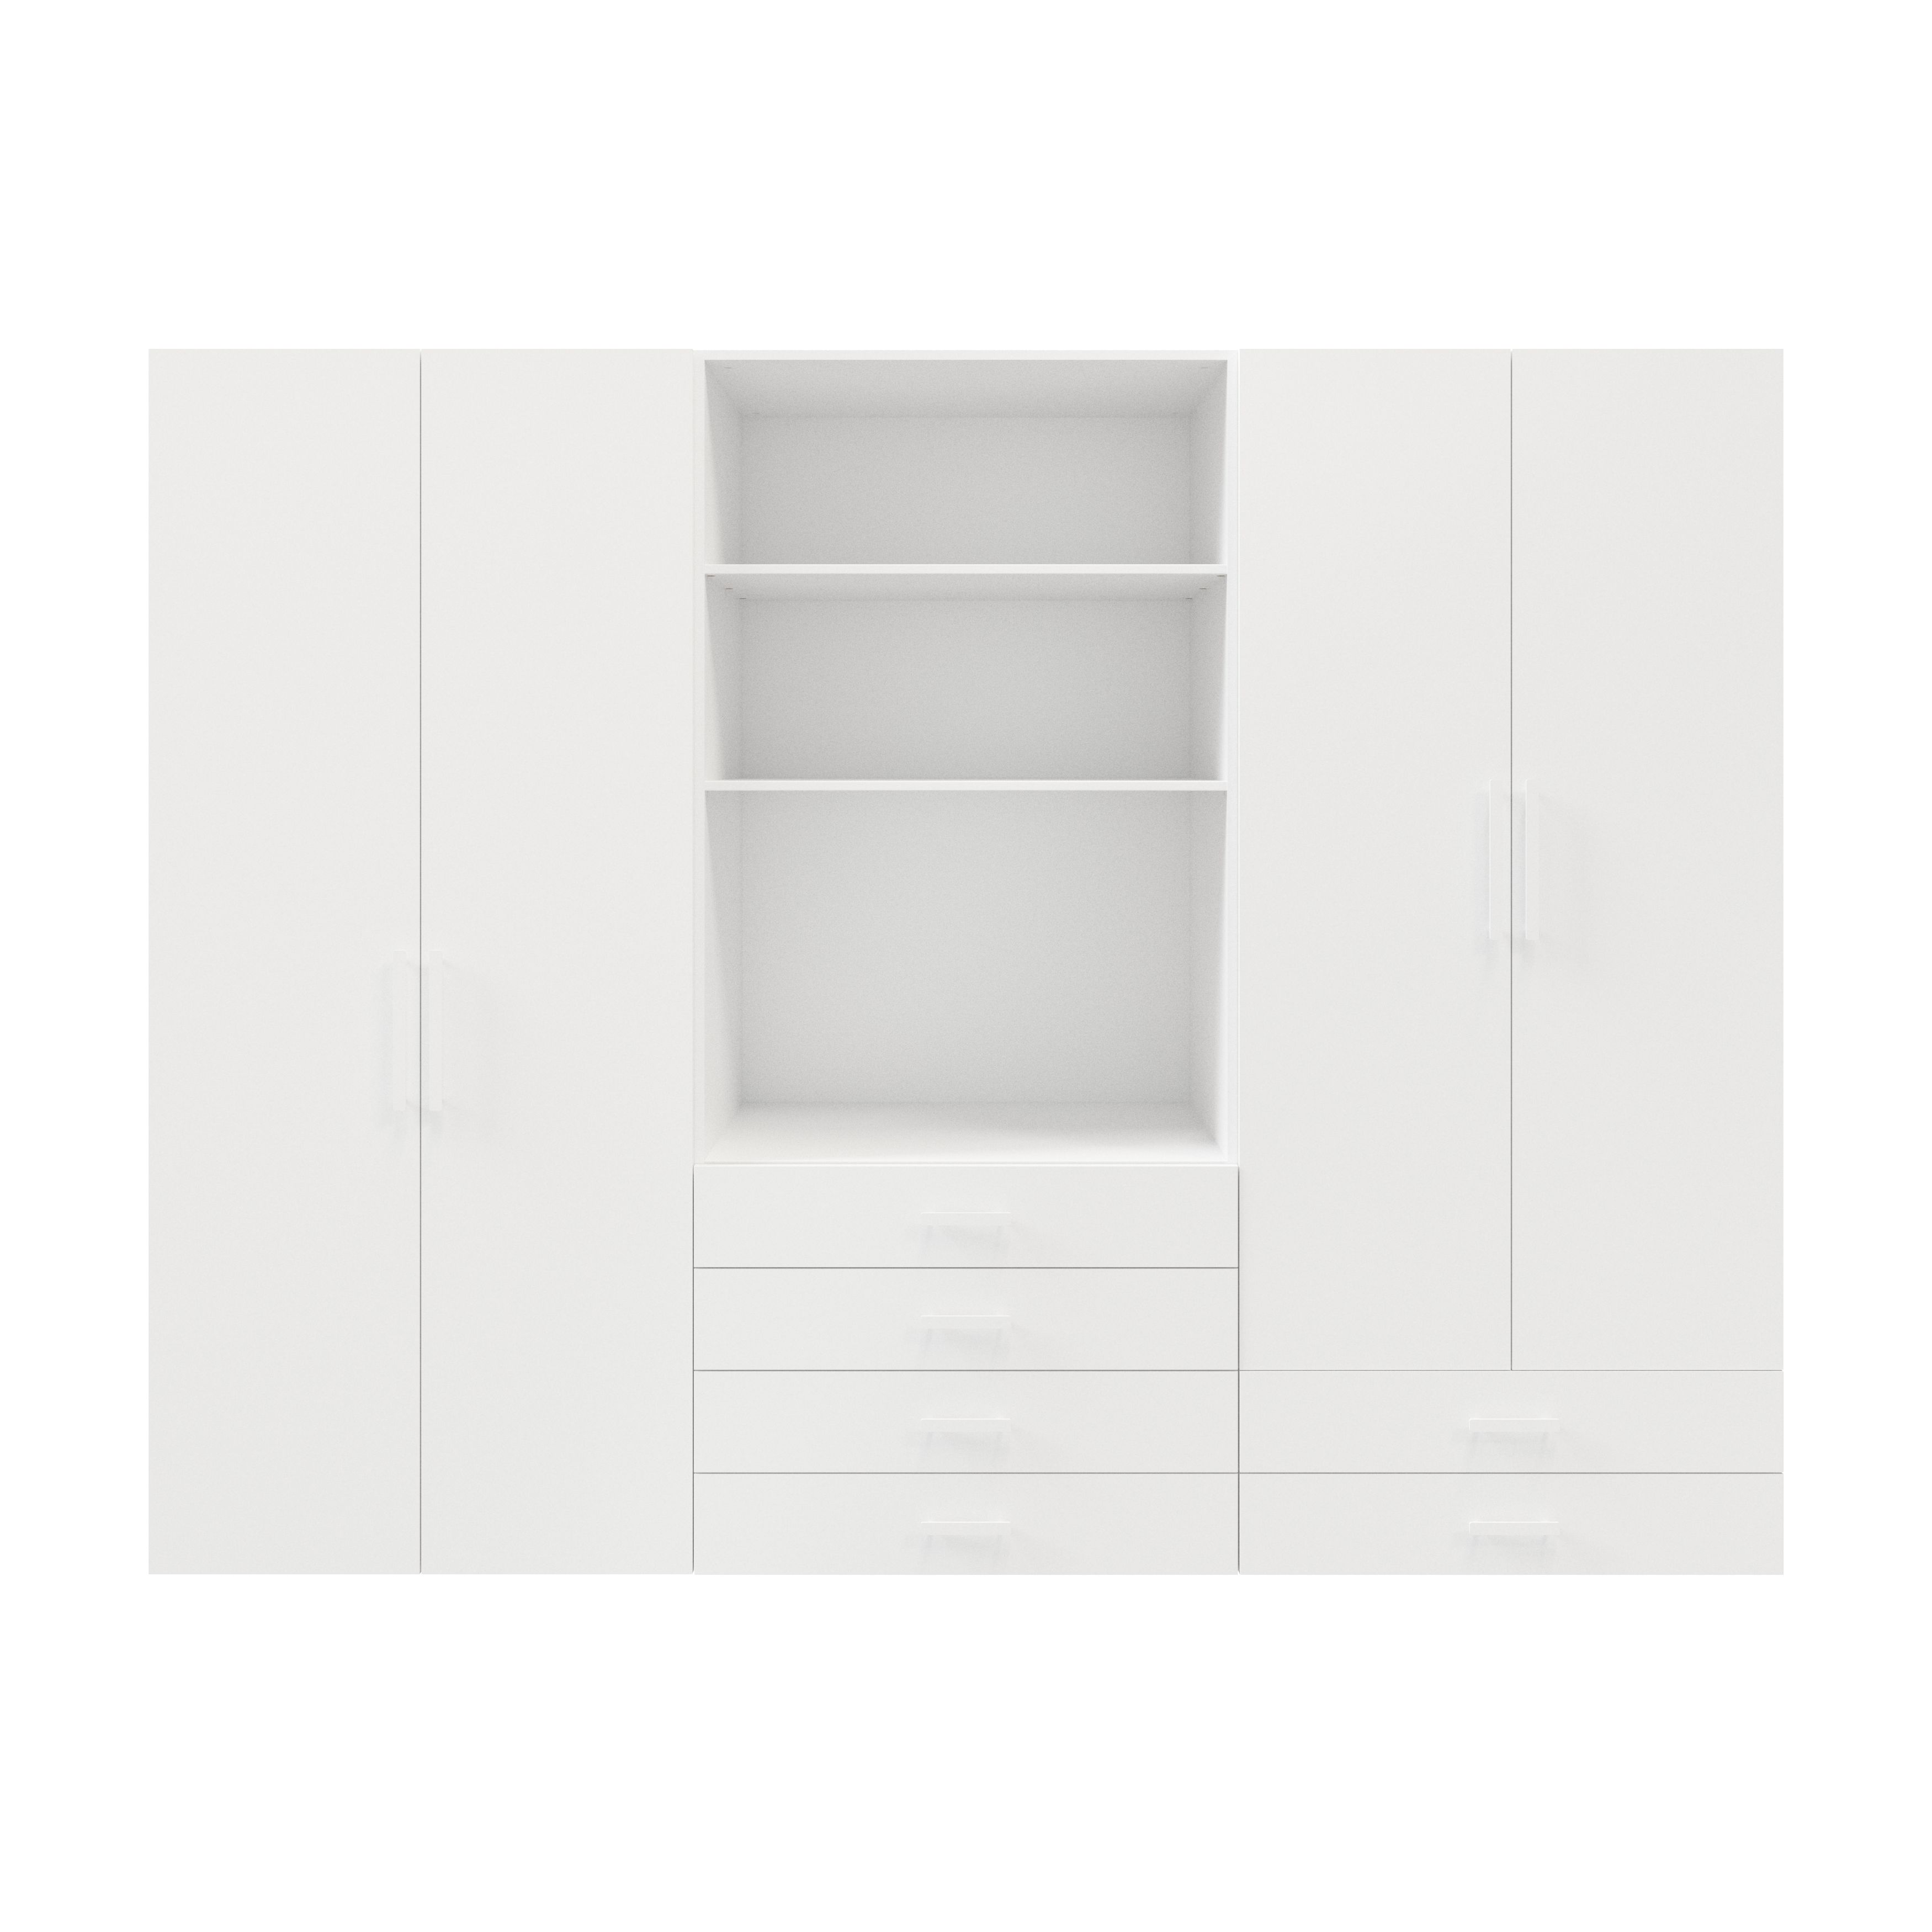 GoodHome Atomia White Bedroom storage unit (H)2250mm (W)3000mm (D)580mm